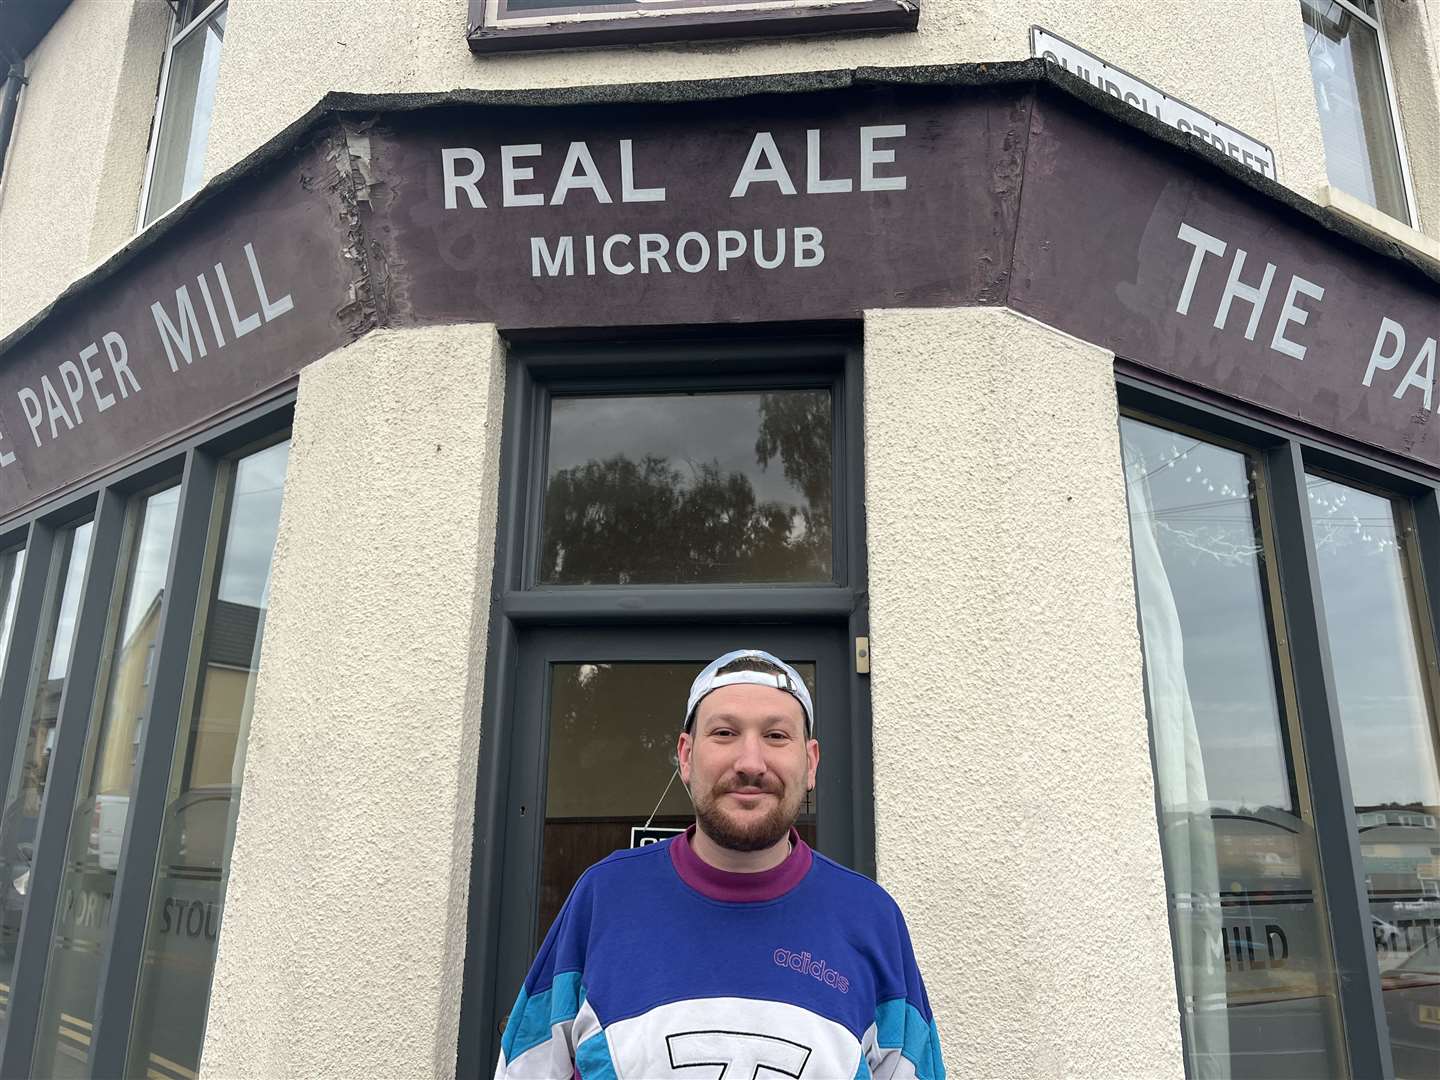 Harvey Melia, 31, from The Paper Mill micro-pub in Sittingbourne